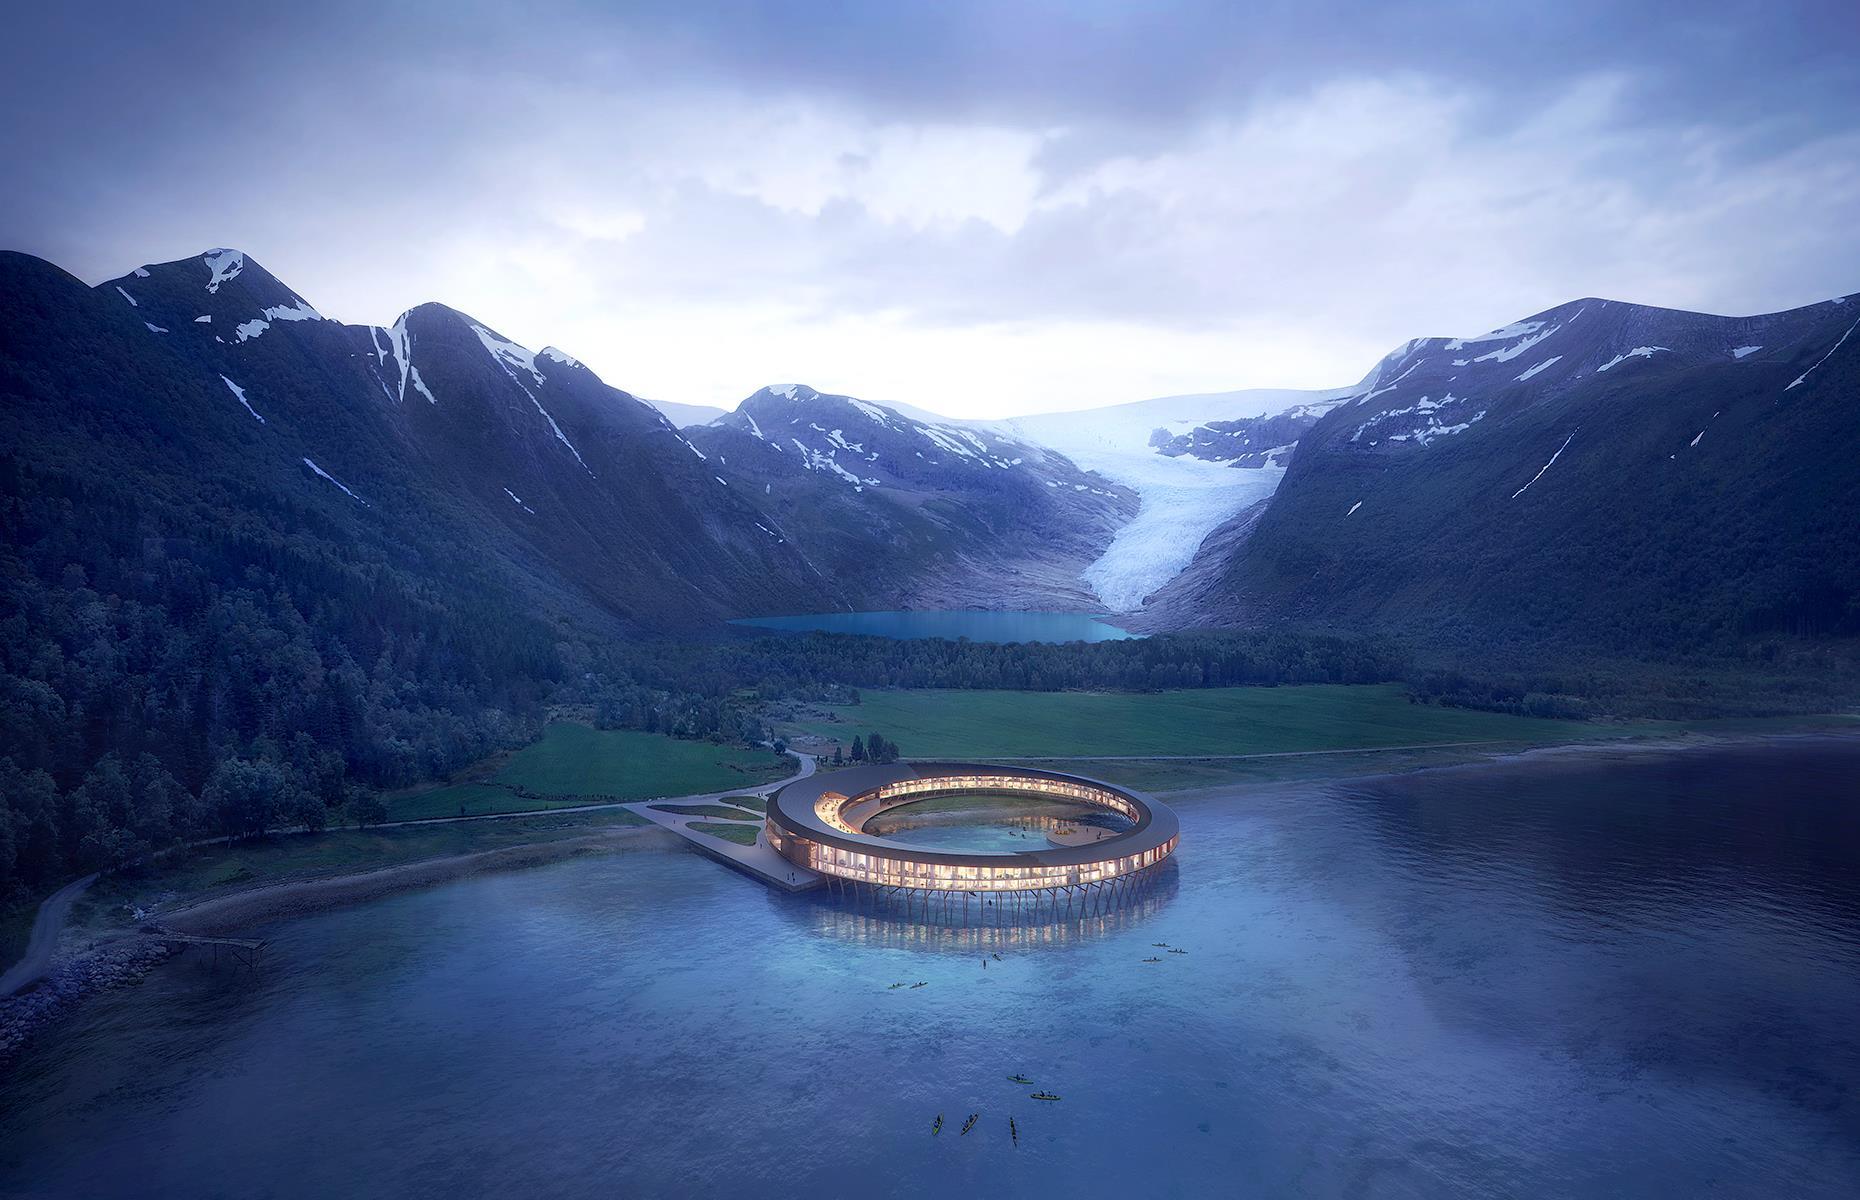 <p>Not only is <a href="https://www.svart.no/">Svart</a> gorgeous to look at, it’s also set to be a sustainable trailblazer. Perched beside the crystal-clear waters of Holandsfjorden in Norway’s Arctic Circle, the hotly anticipated resort will be energy-positive – meaning it’ll produce more energy than it uses. This will be partly achieved with in-built solar panels, which will absorb sunlight reflected off the nearby Svartisen glacier.</p>